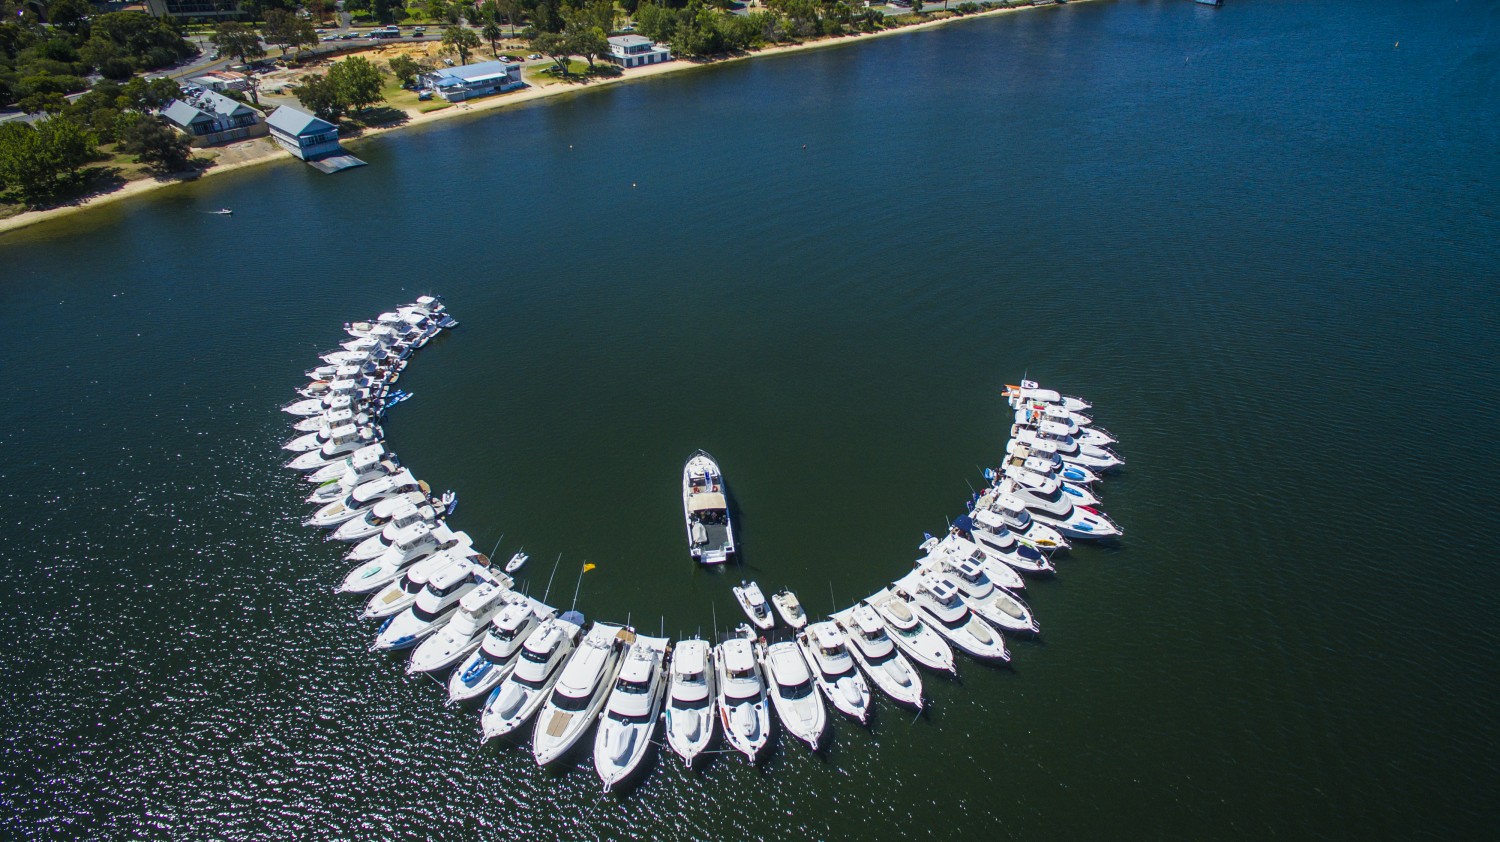 west-australian-riviera-owners-rafted-up-in-world-record-numbers-on-the-swan-river-in-perth